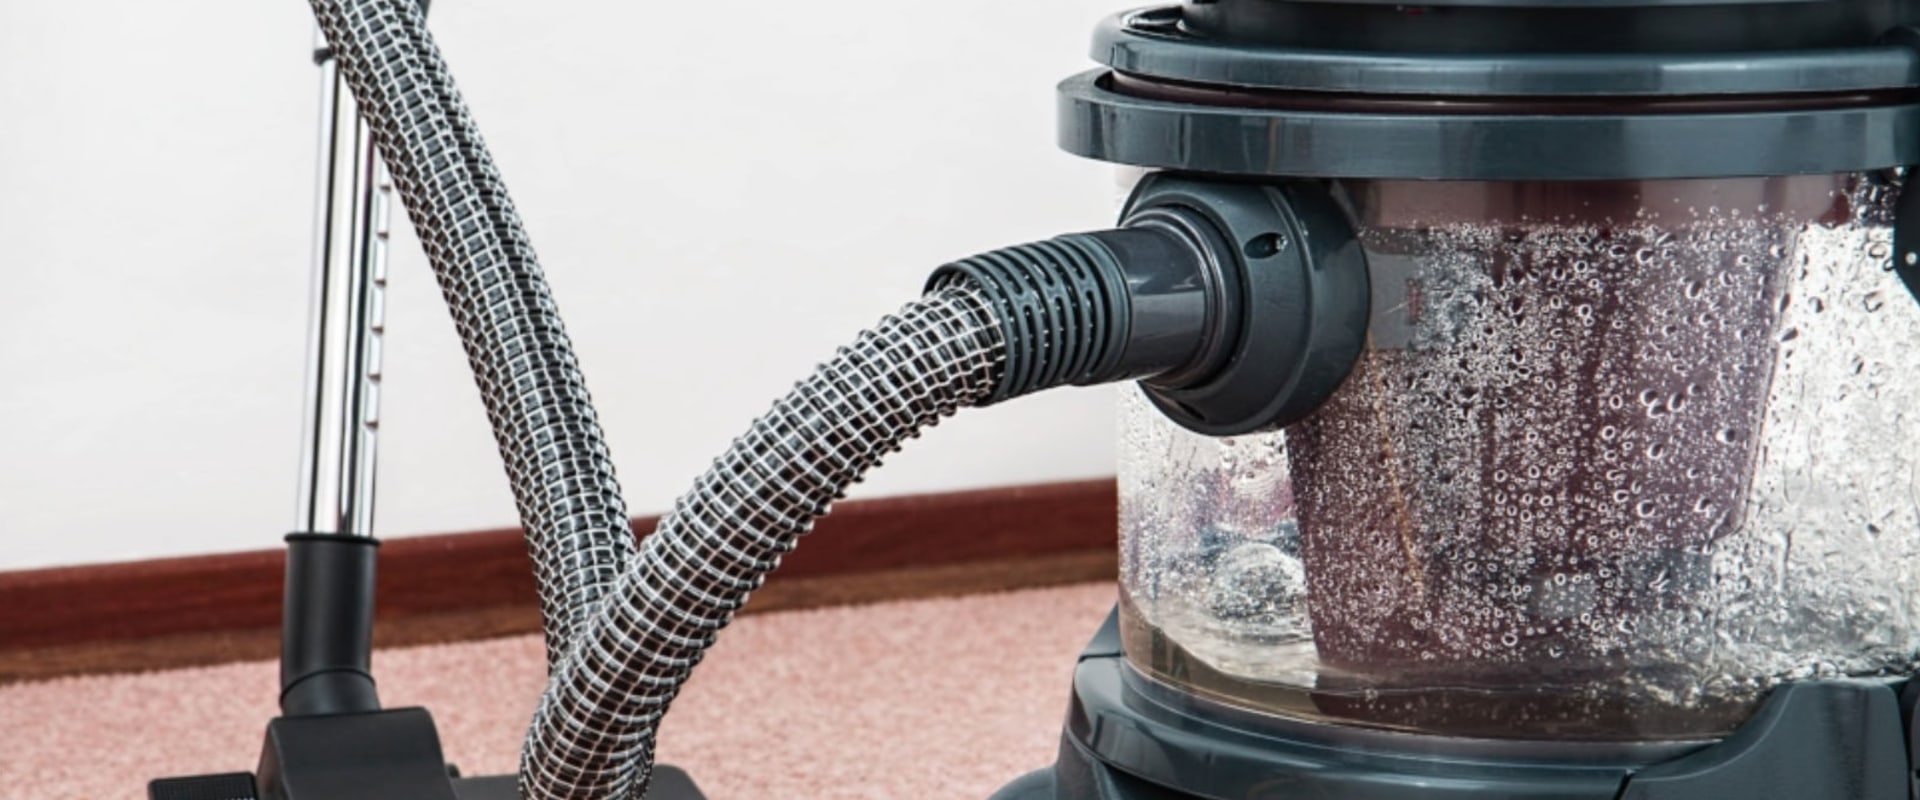 Can I Use a Vacuum Cleaner on Wet Carpets? - A Guide for Safe Cleaning